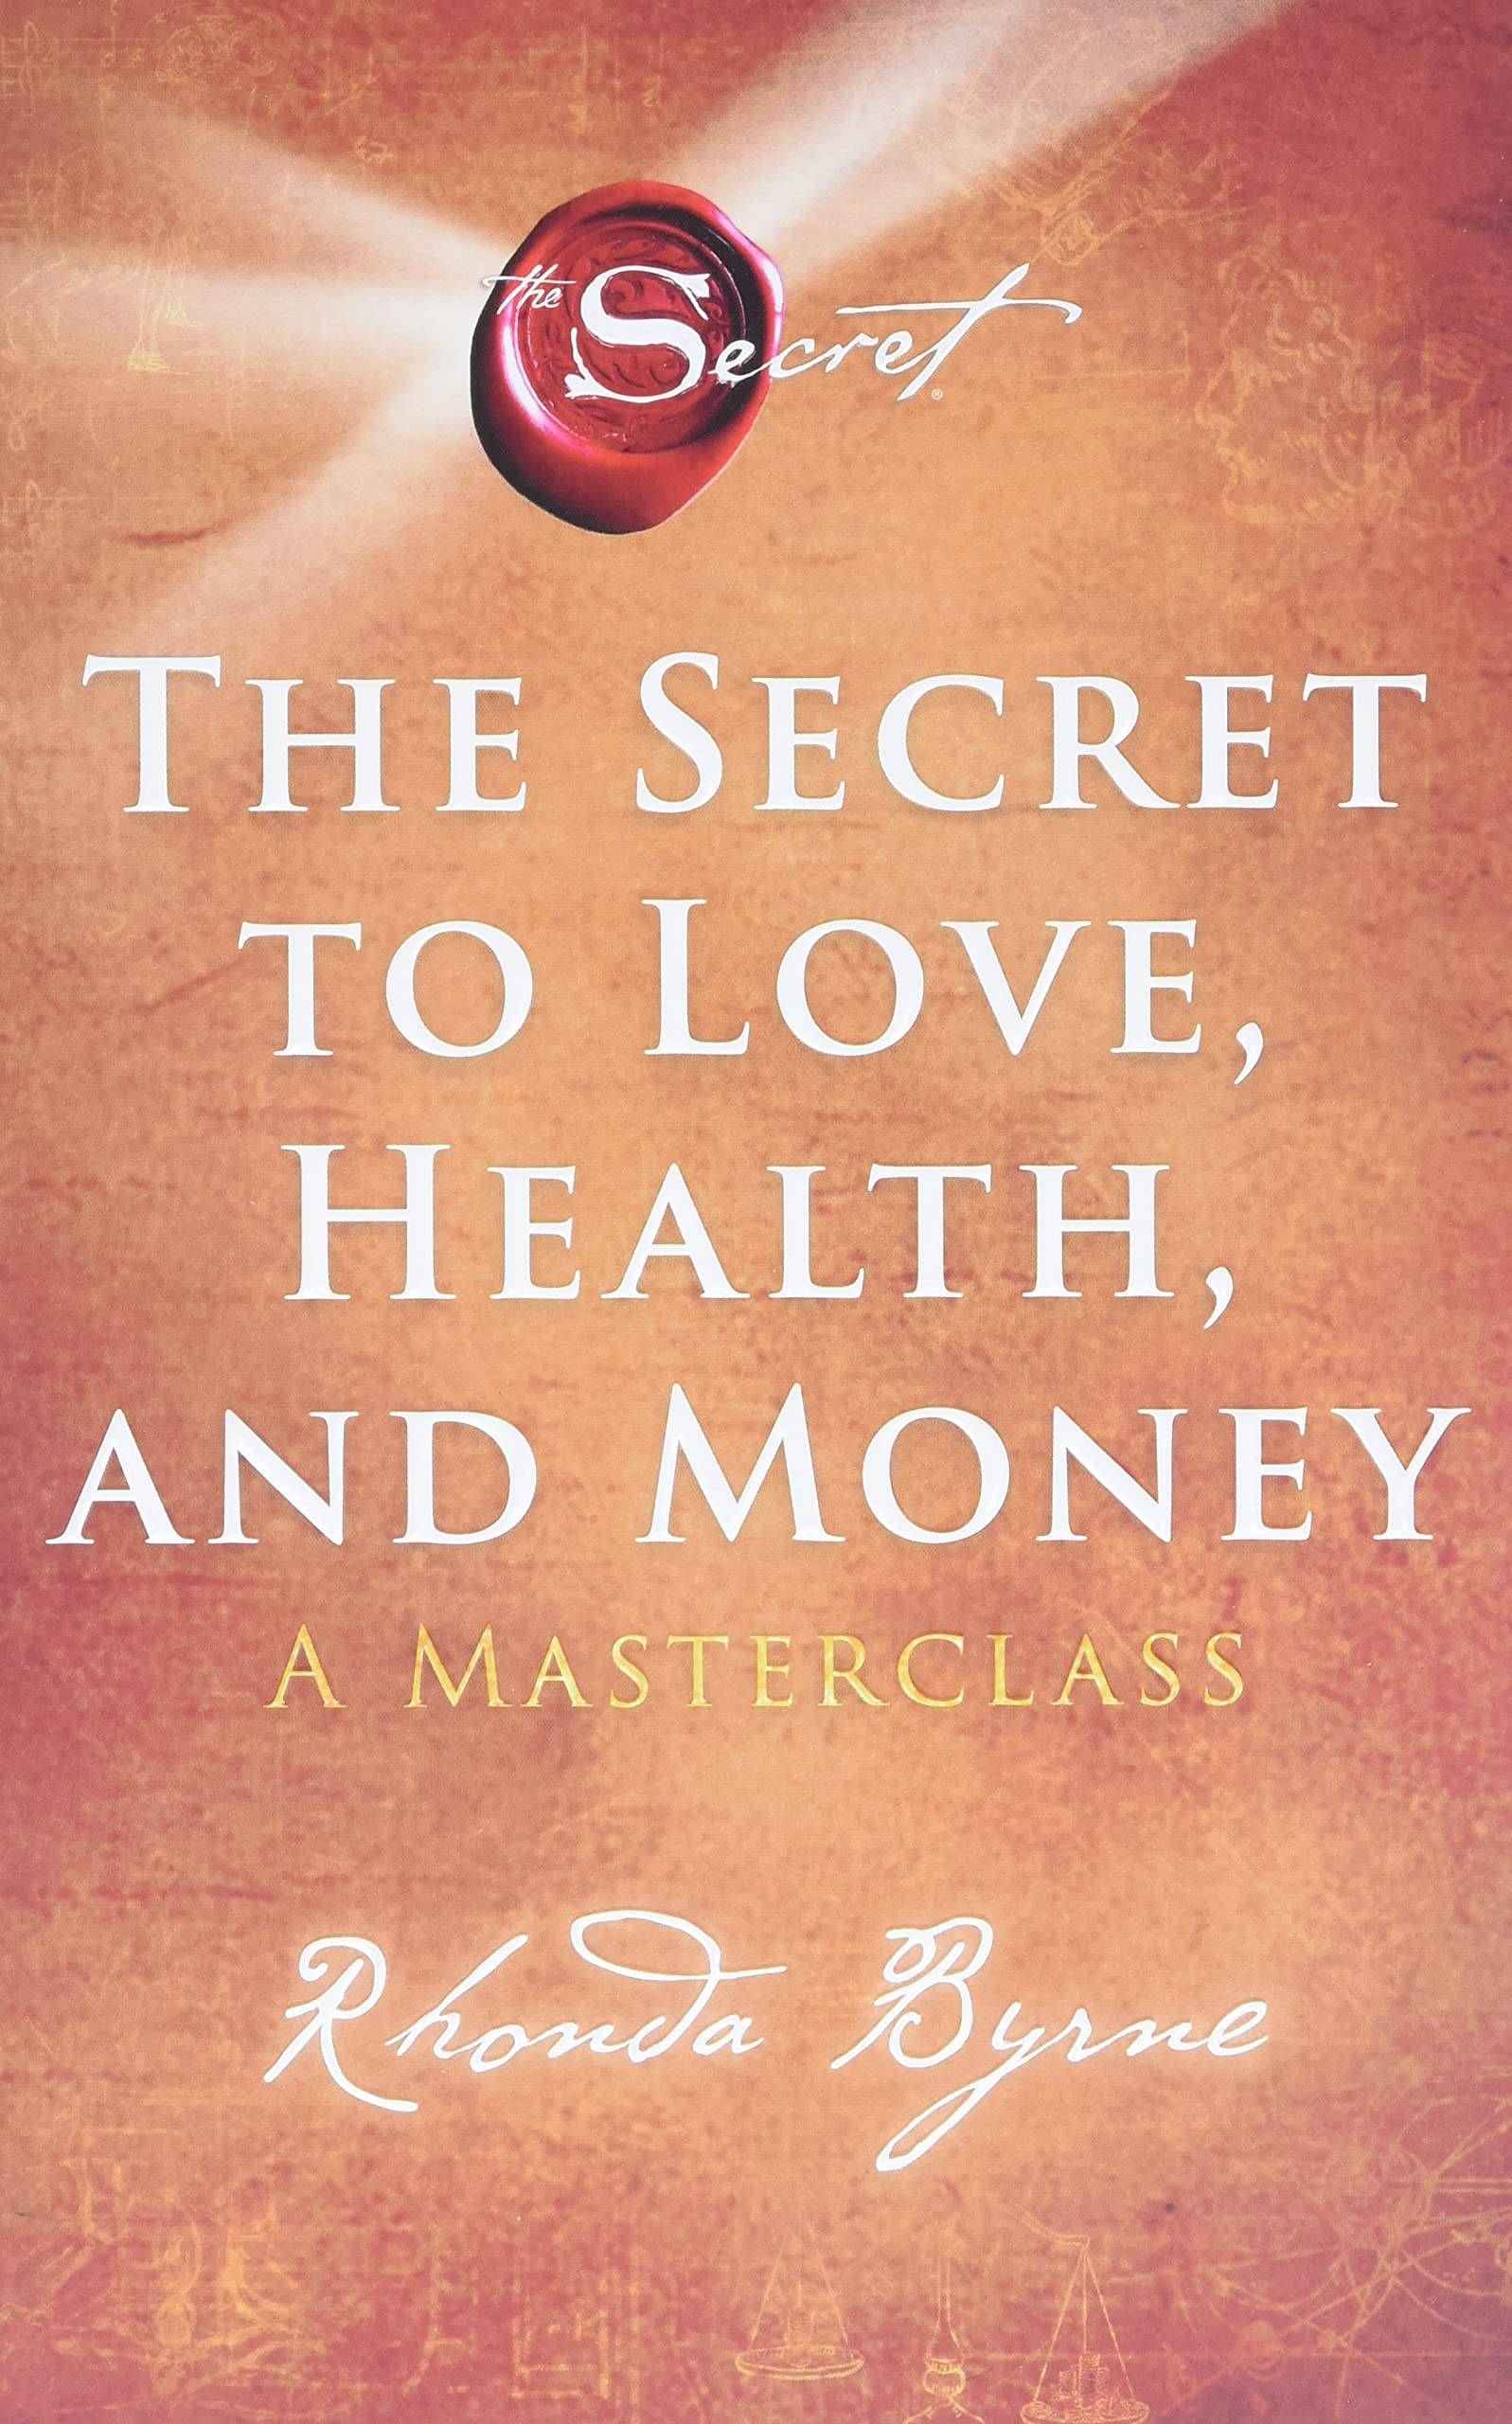 Image for "The Secret to Love, Health, and Money"